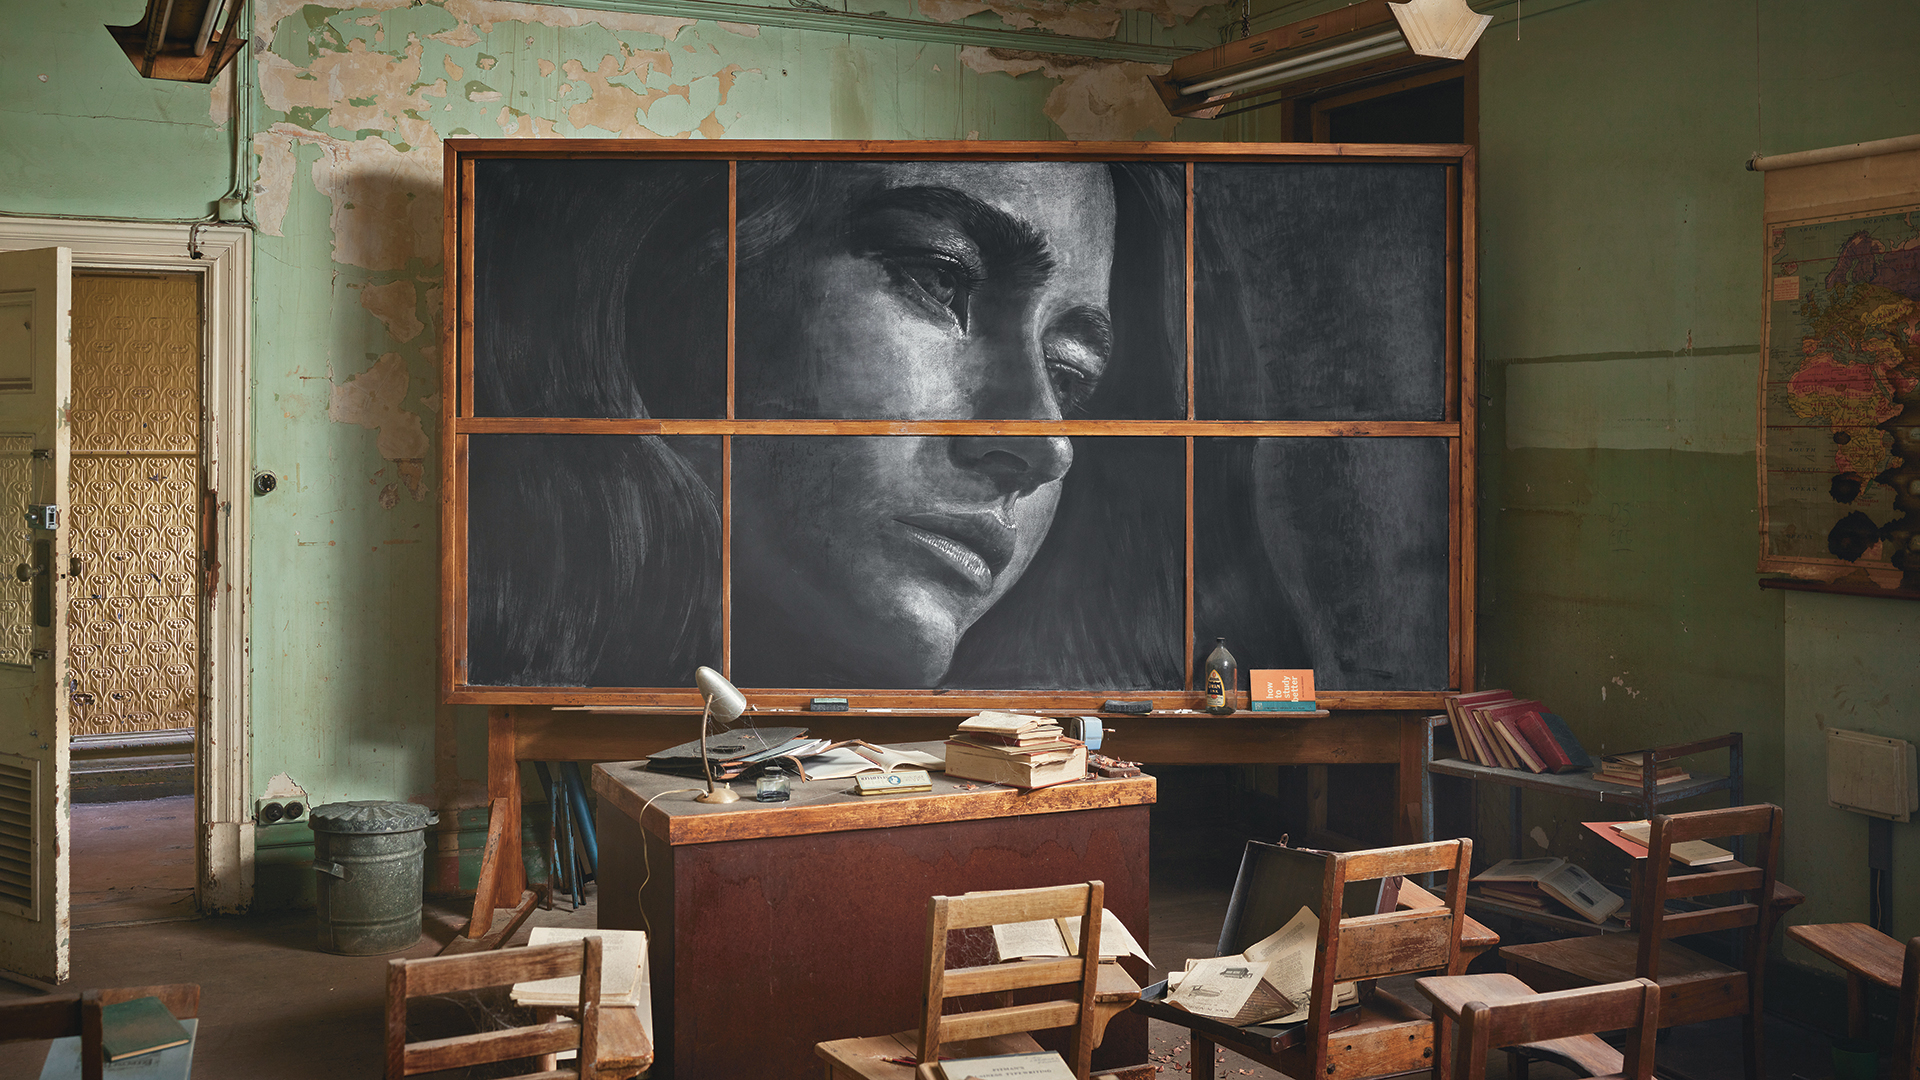 Painting of a woman's face in a room